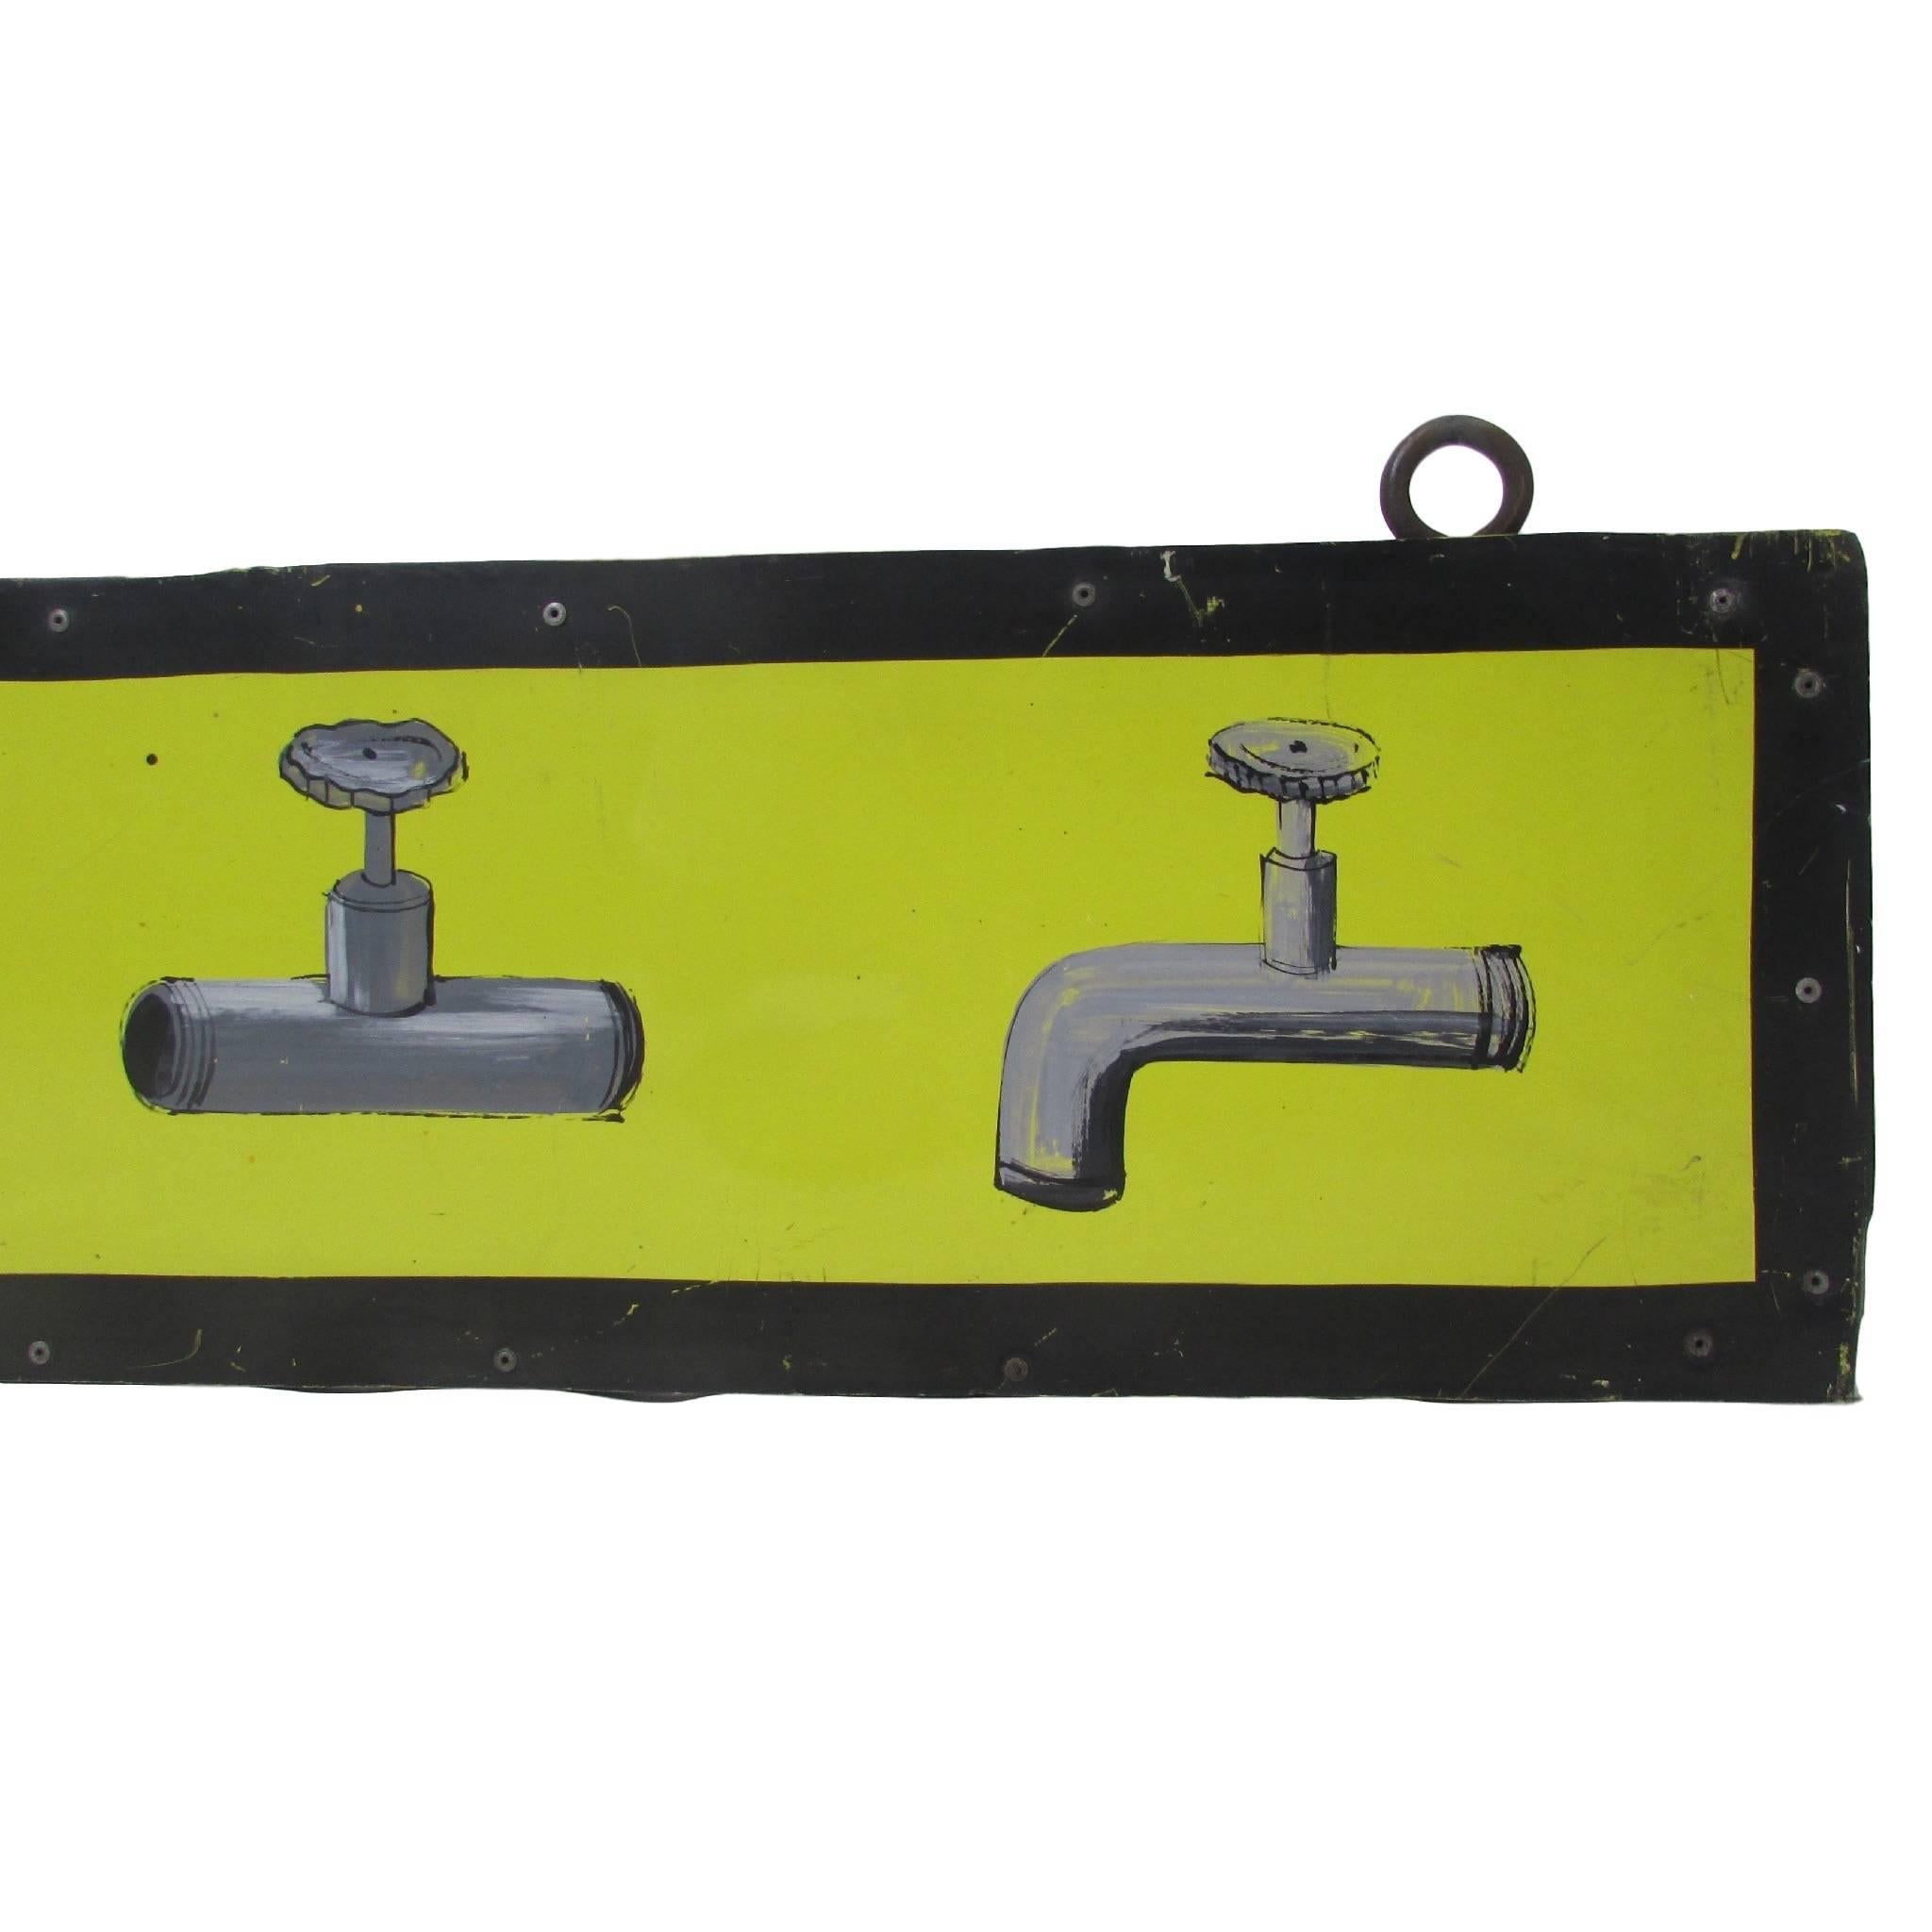 This is a unique and playful vintage hand painted metal hardware sign mounted on an aluminum frame. The hand painted images include a paint can, paint brush, paint roller, drill, jigsaw, light bulb, fluorescent tube, plumbing, and a water spigot.  
